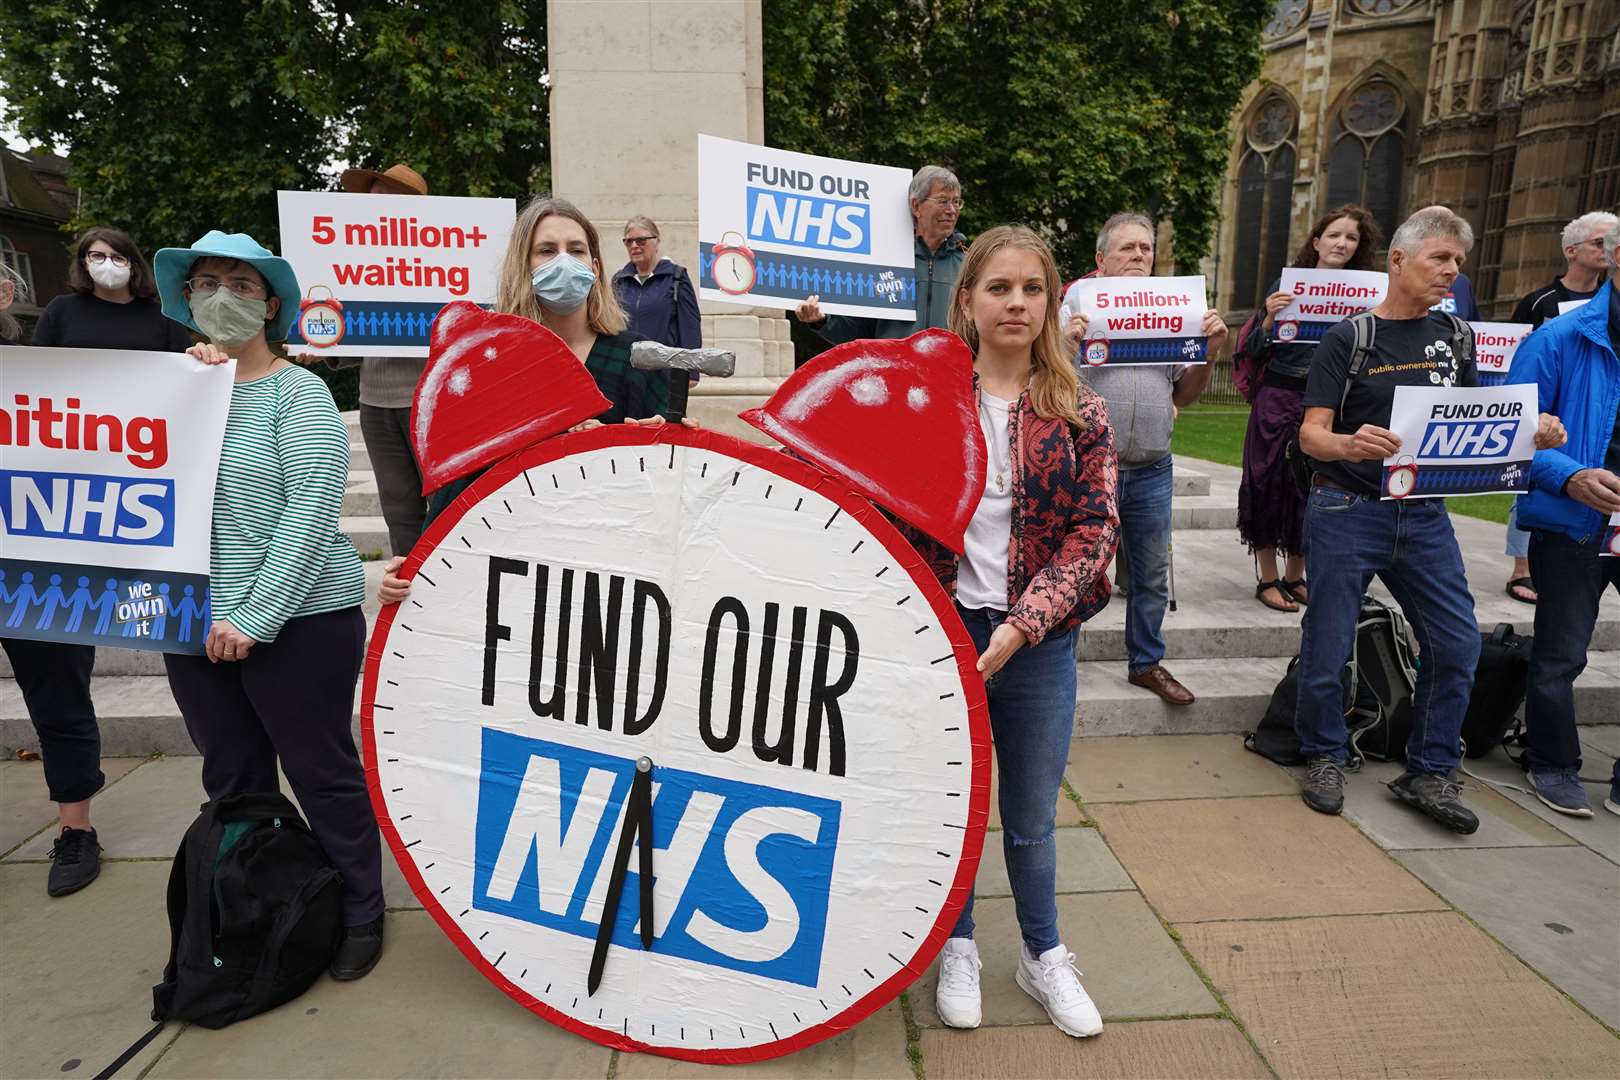 Campaigners are seeking more money for the NHS (Stefan Rousseau/PA)